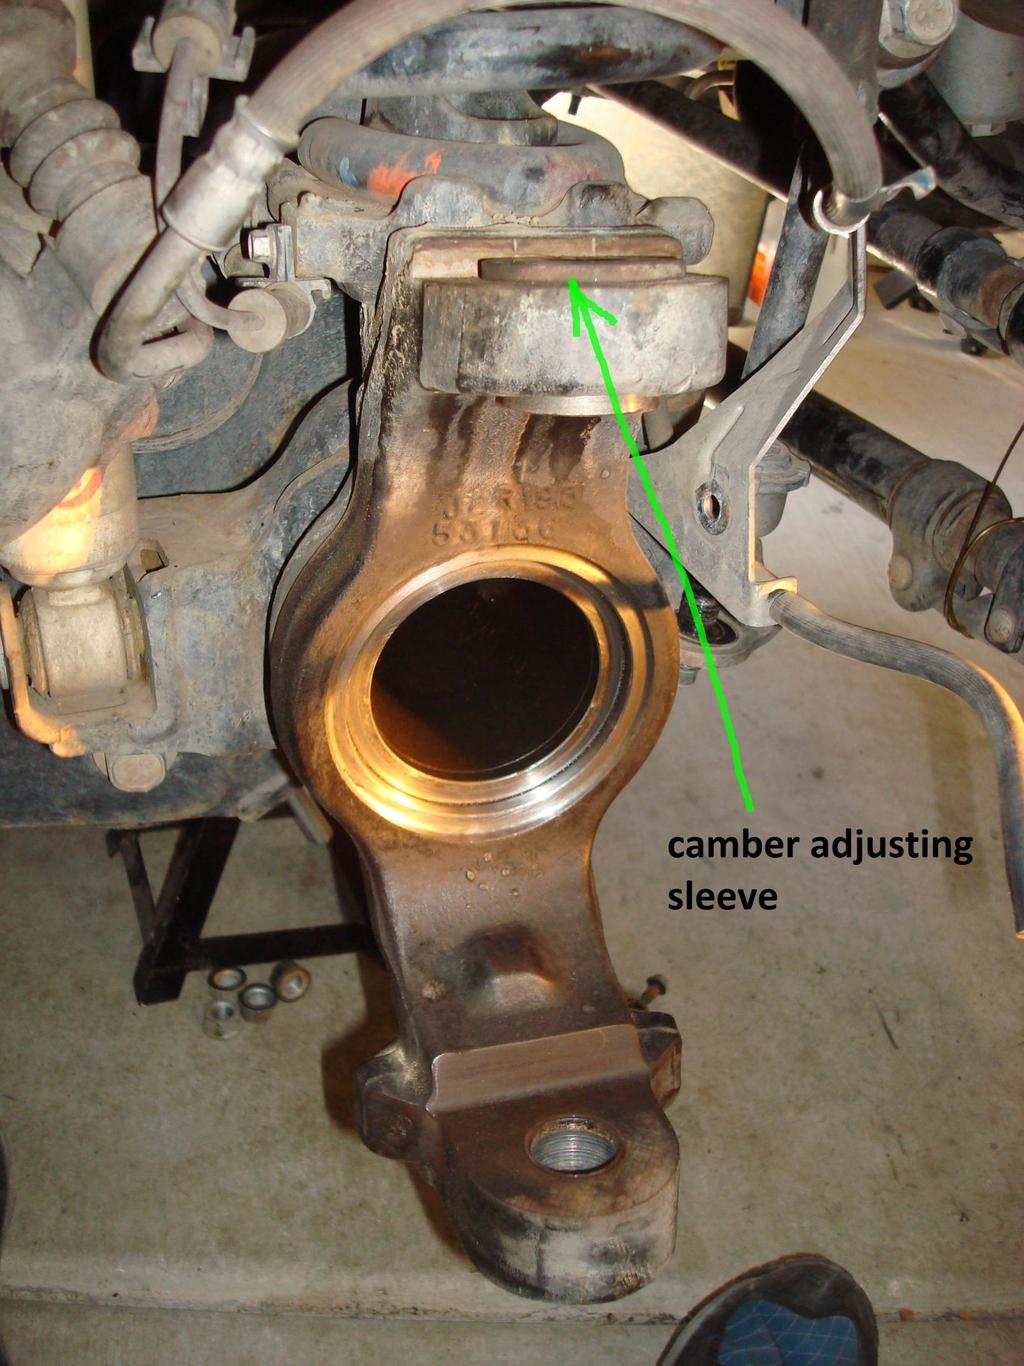 7) Loosen the nuts on the ball joints to be flush with the stud, then start whacking with the sledgehammer.